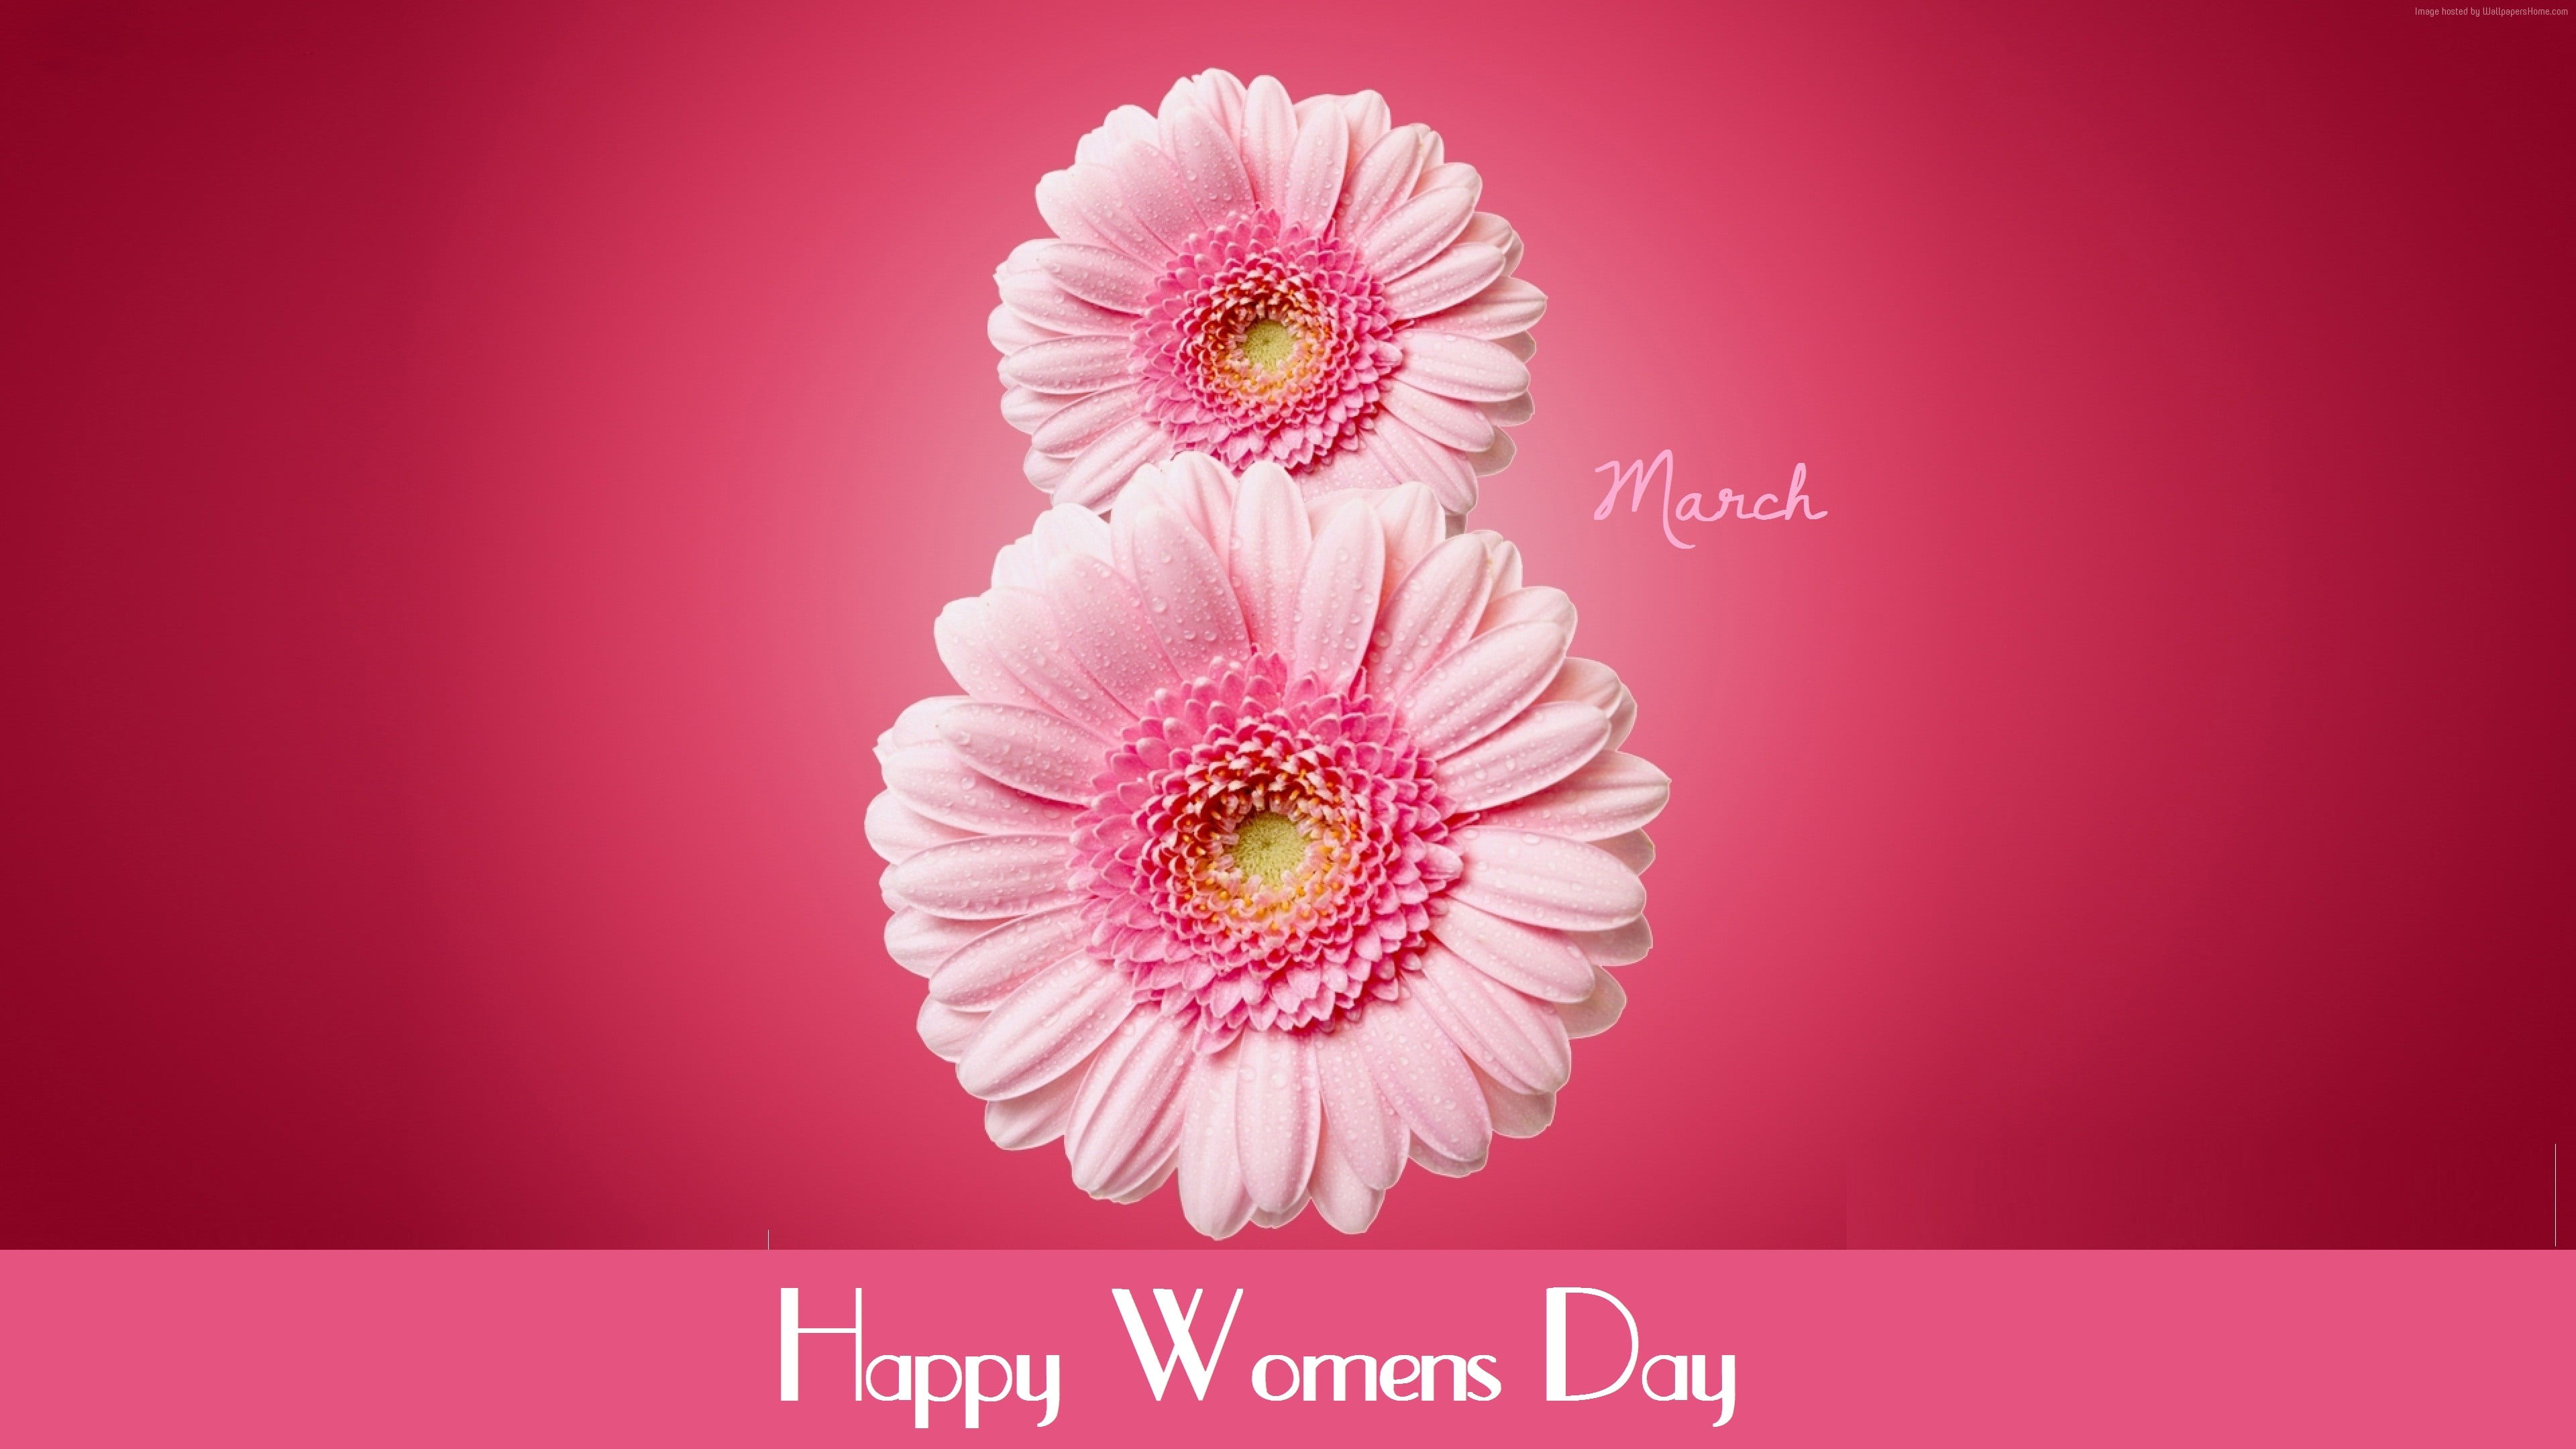 Happy Womens Day text overlay